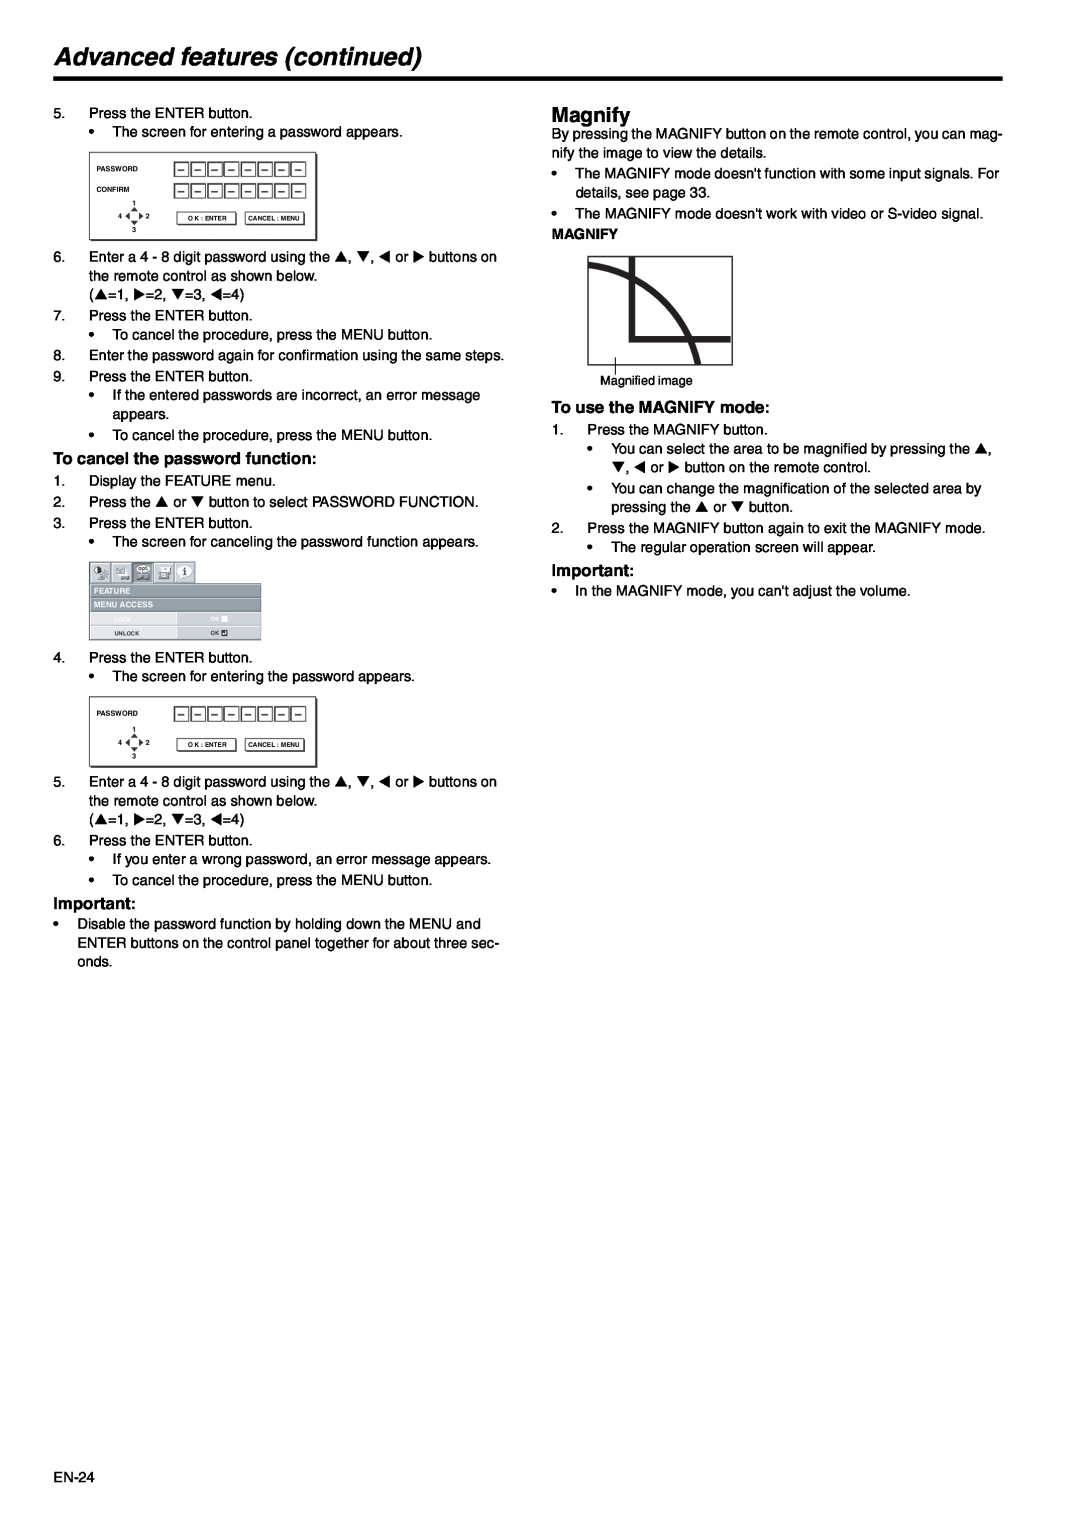 Mitsubishi Electronics XD500U-ST user manual Advanced features continued, Magnify, To cancel the password function 